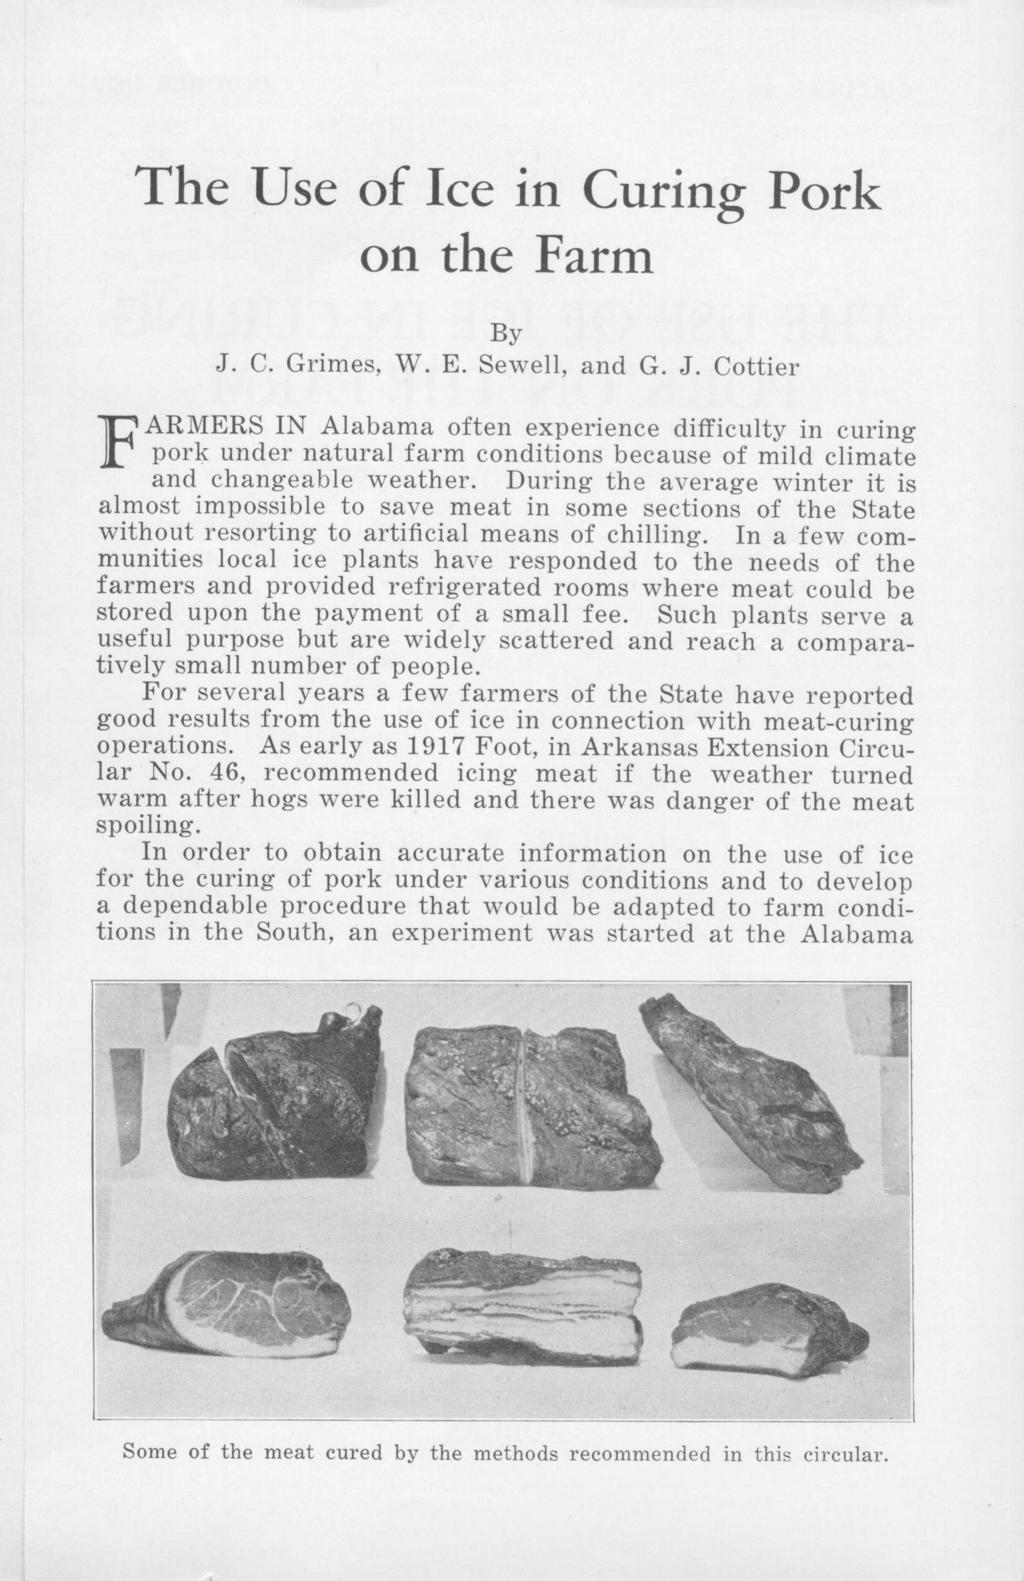 F The Use of Ice in Curing Pork on the Farm By J. C. Grimes, W. E. Sevell. and G. J. Cottier ARMERS IN Alabama often experience difficulty in curing pork under natural farm conditions because of mild climate and changeable weather.